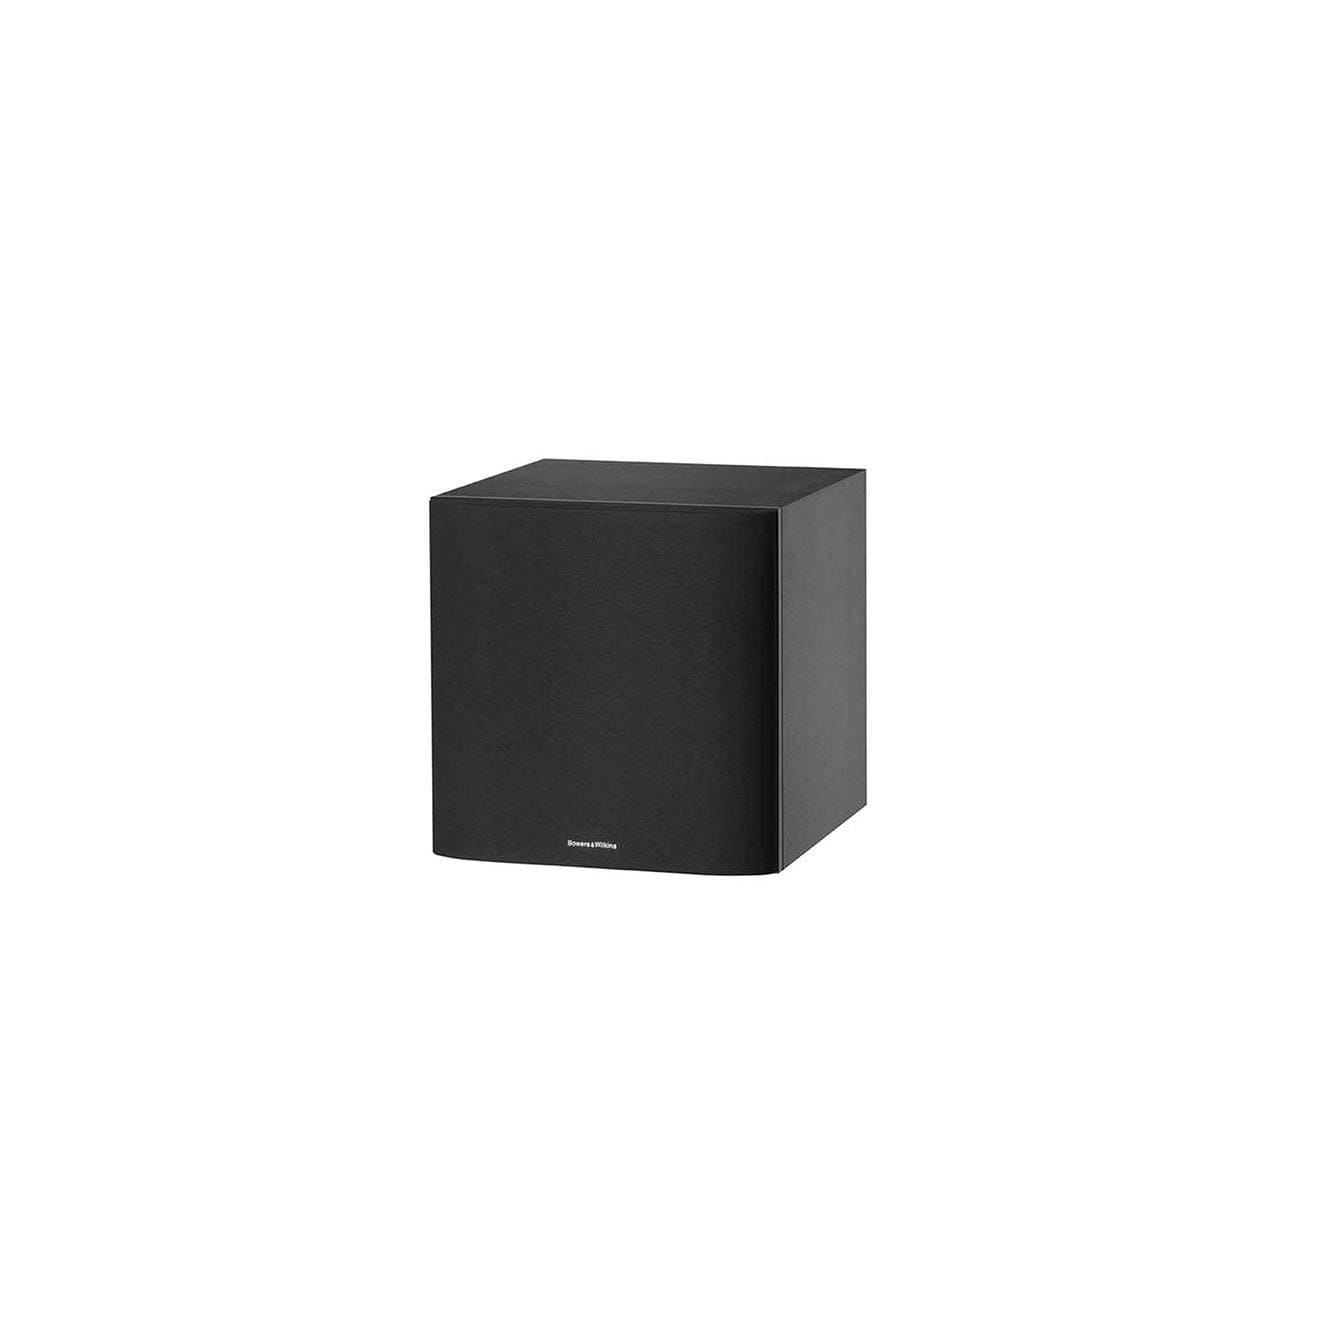 Bowers & Wilkins Subwoofers B&W ASW608 8-Inch 200W Subwoofer - Matte Black